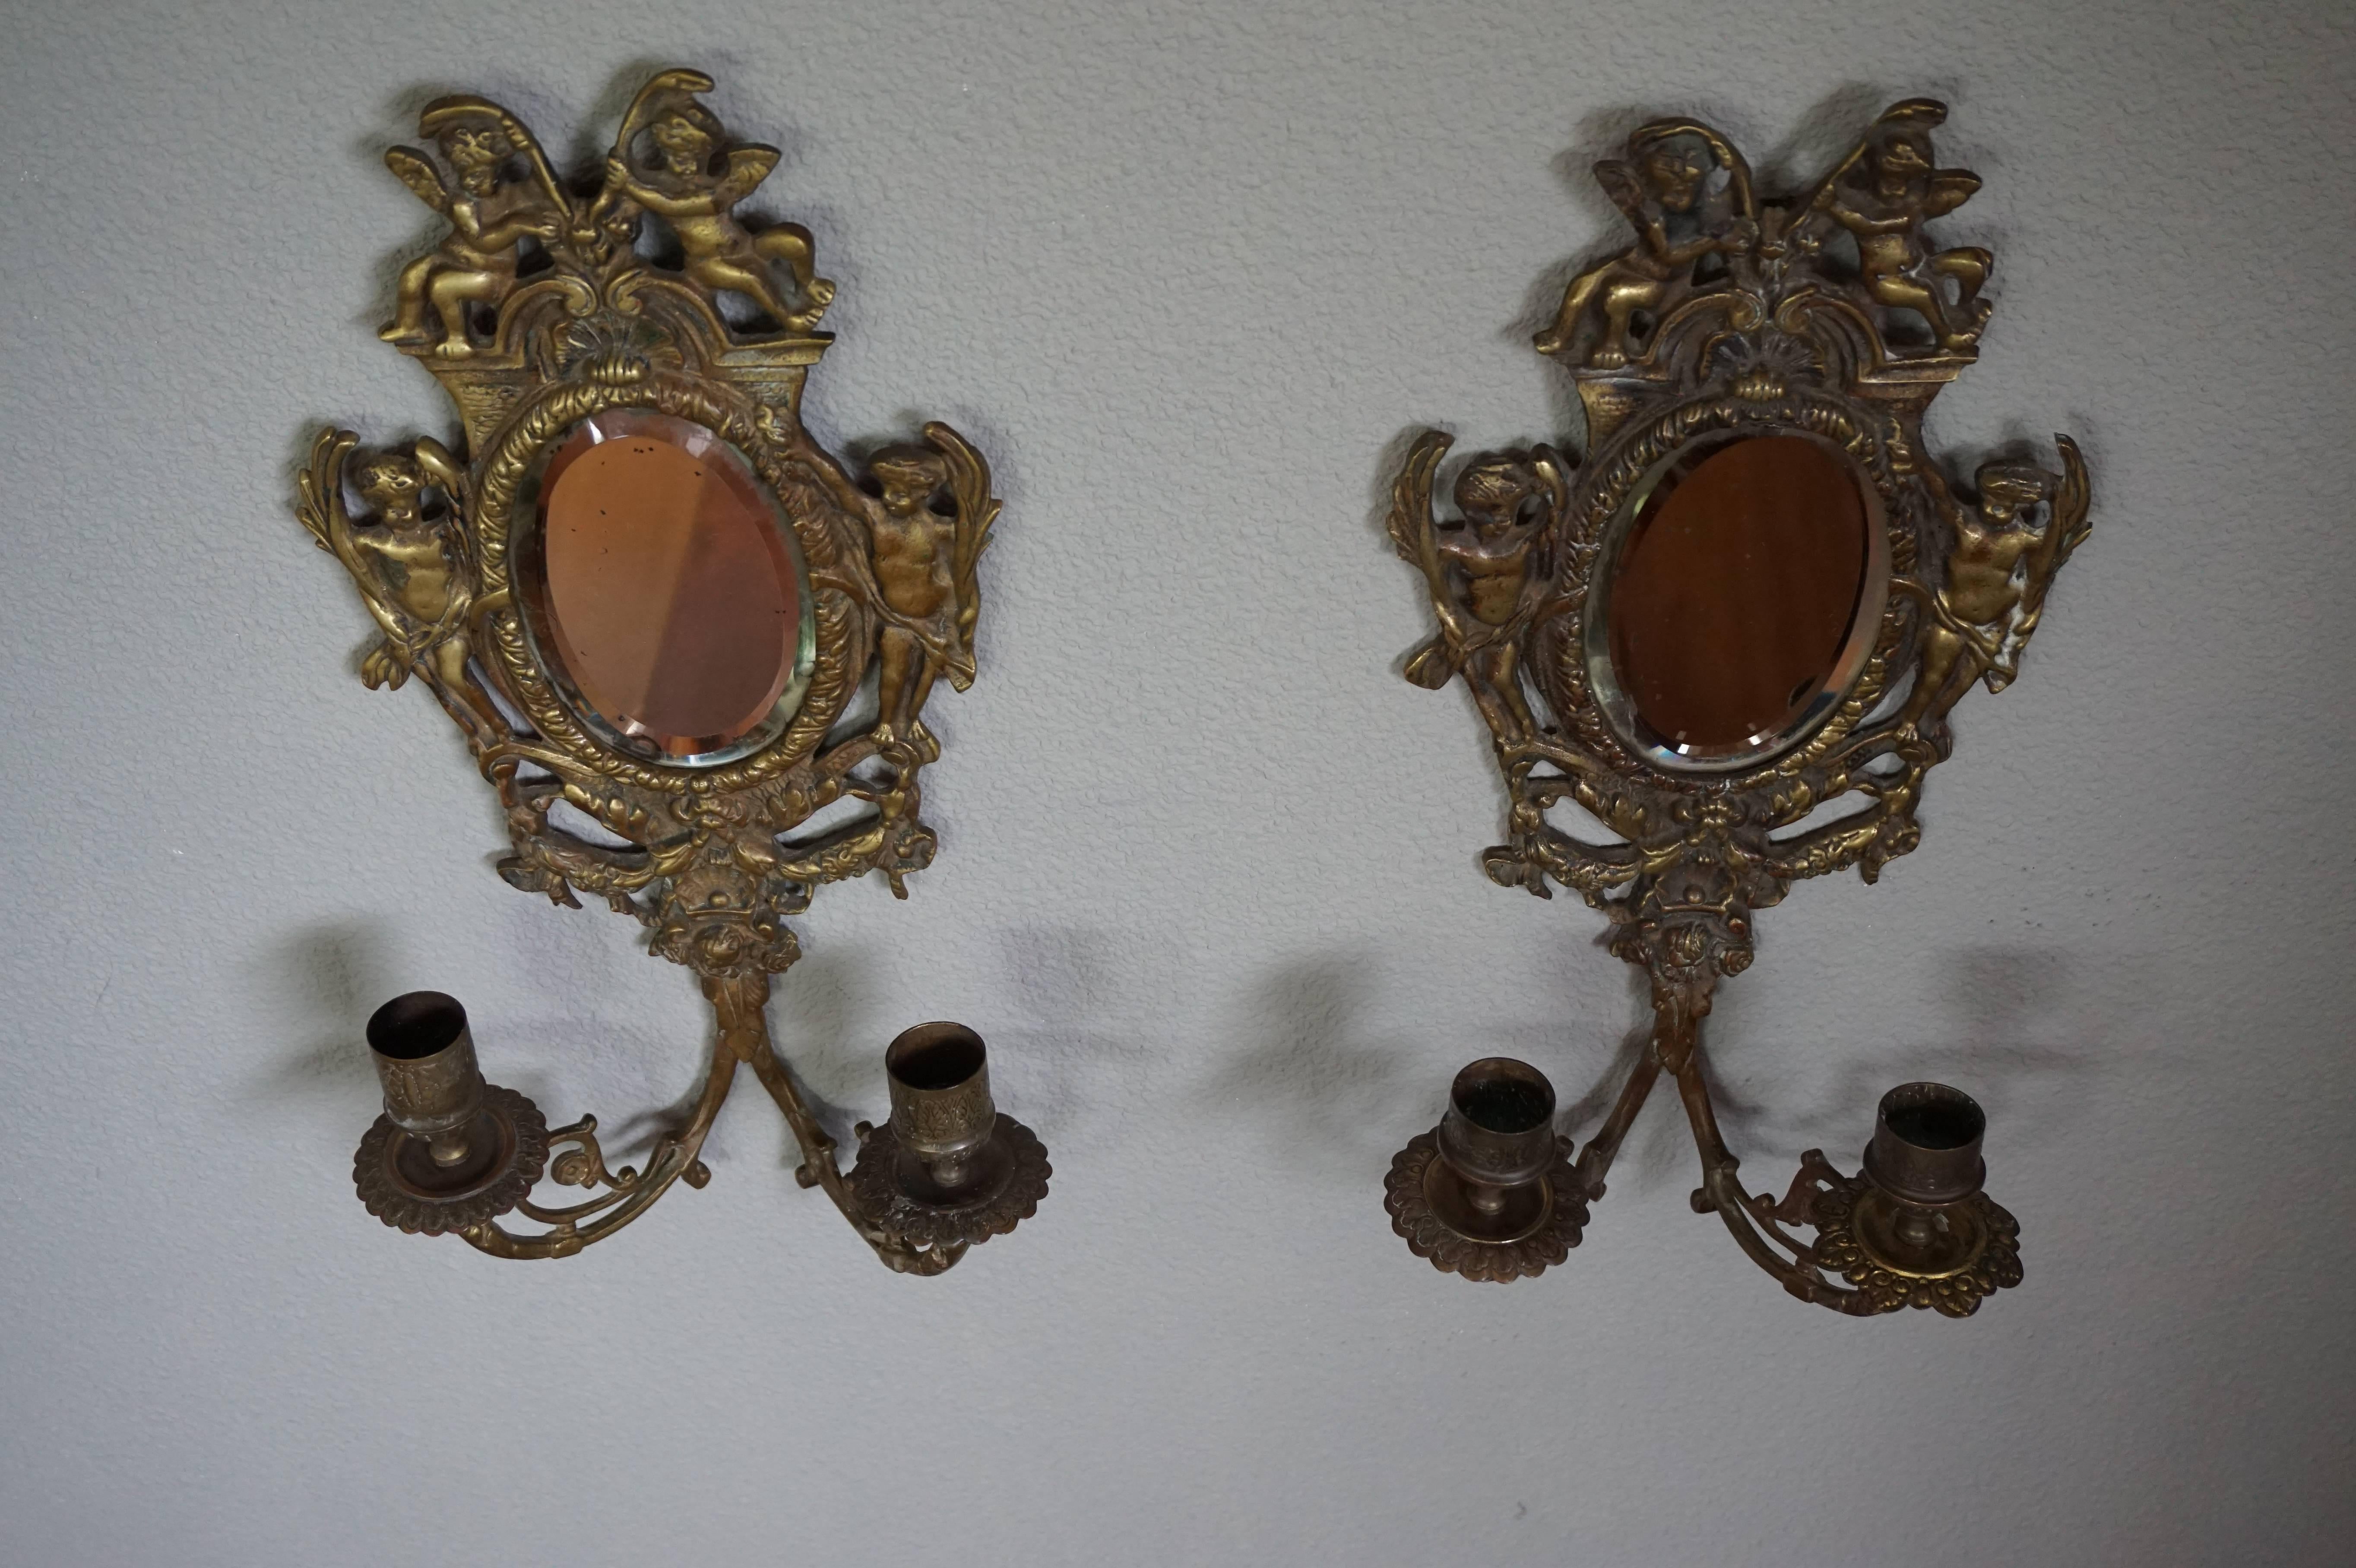 Antique Pair of Cast Bronze Wall Sconces / Candelabras with Oval Beveled Mirrors 3